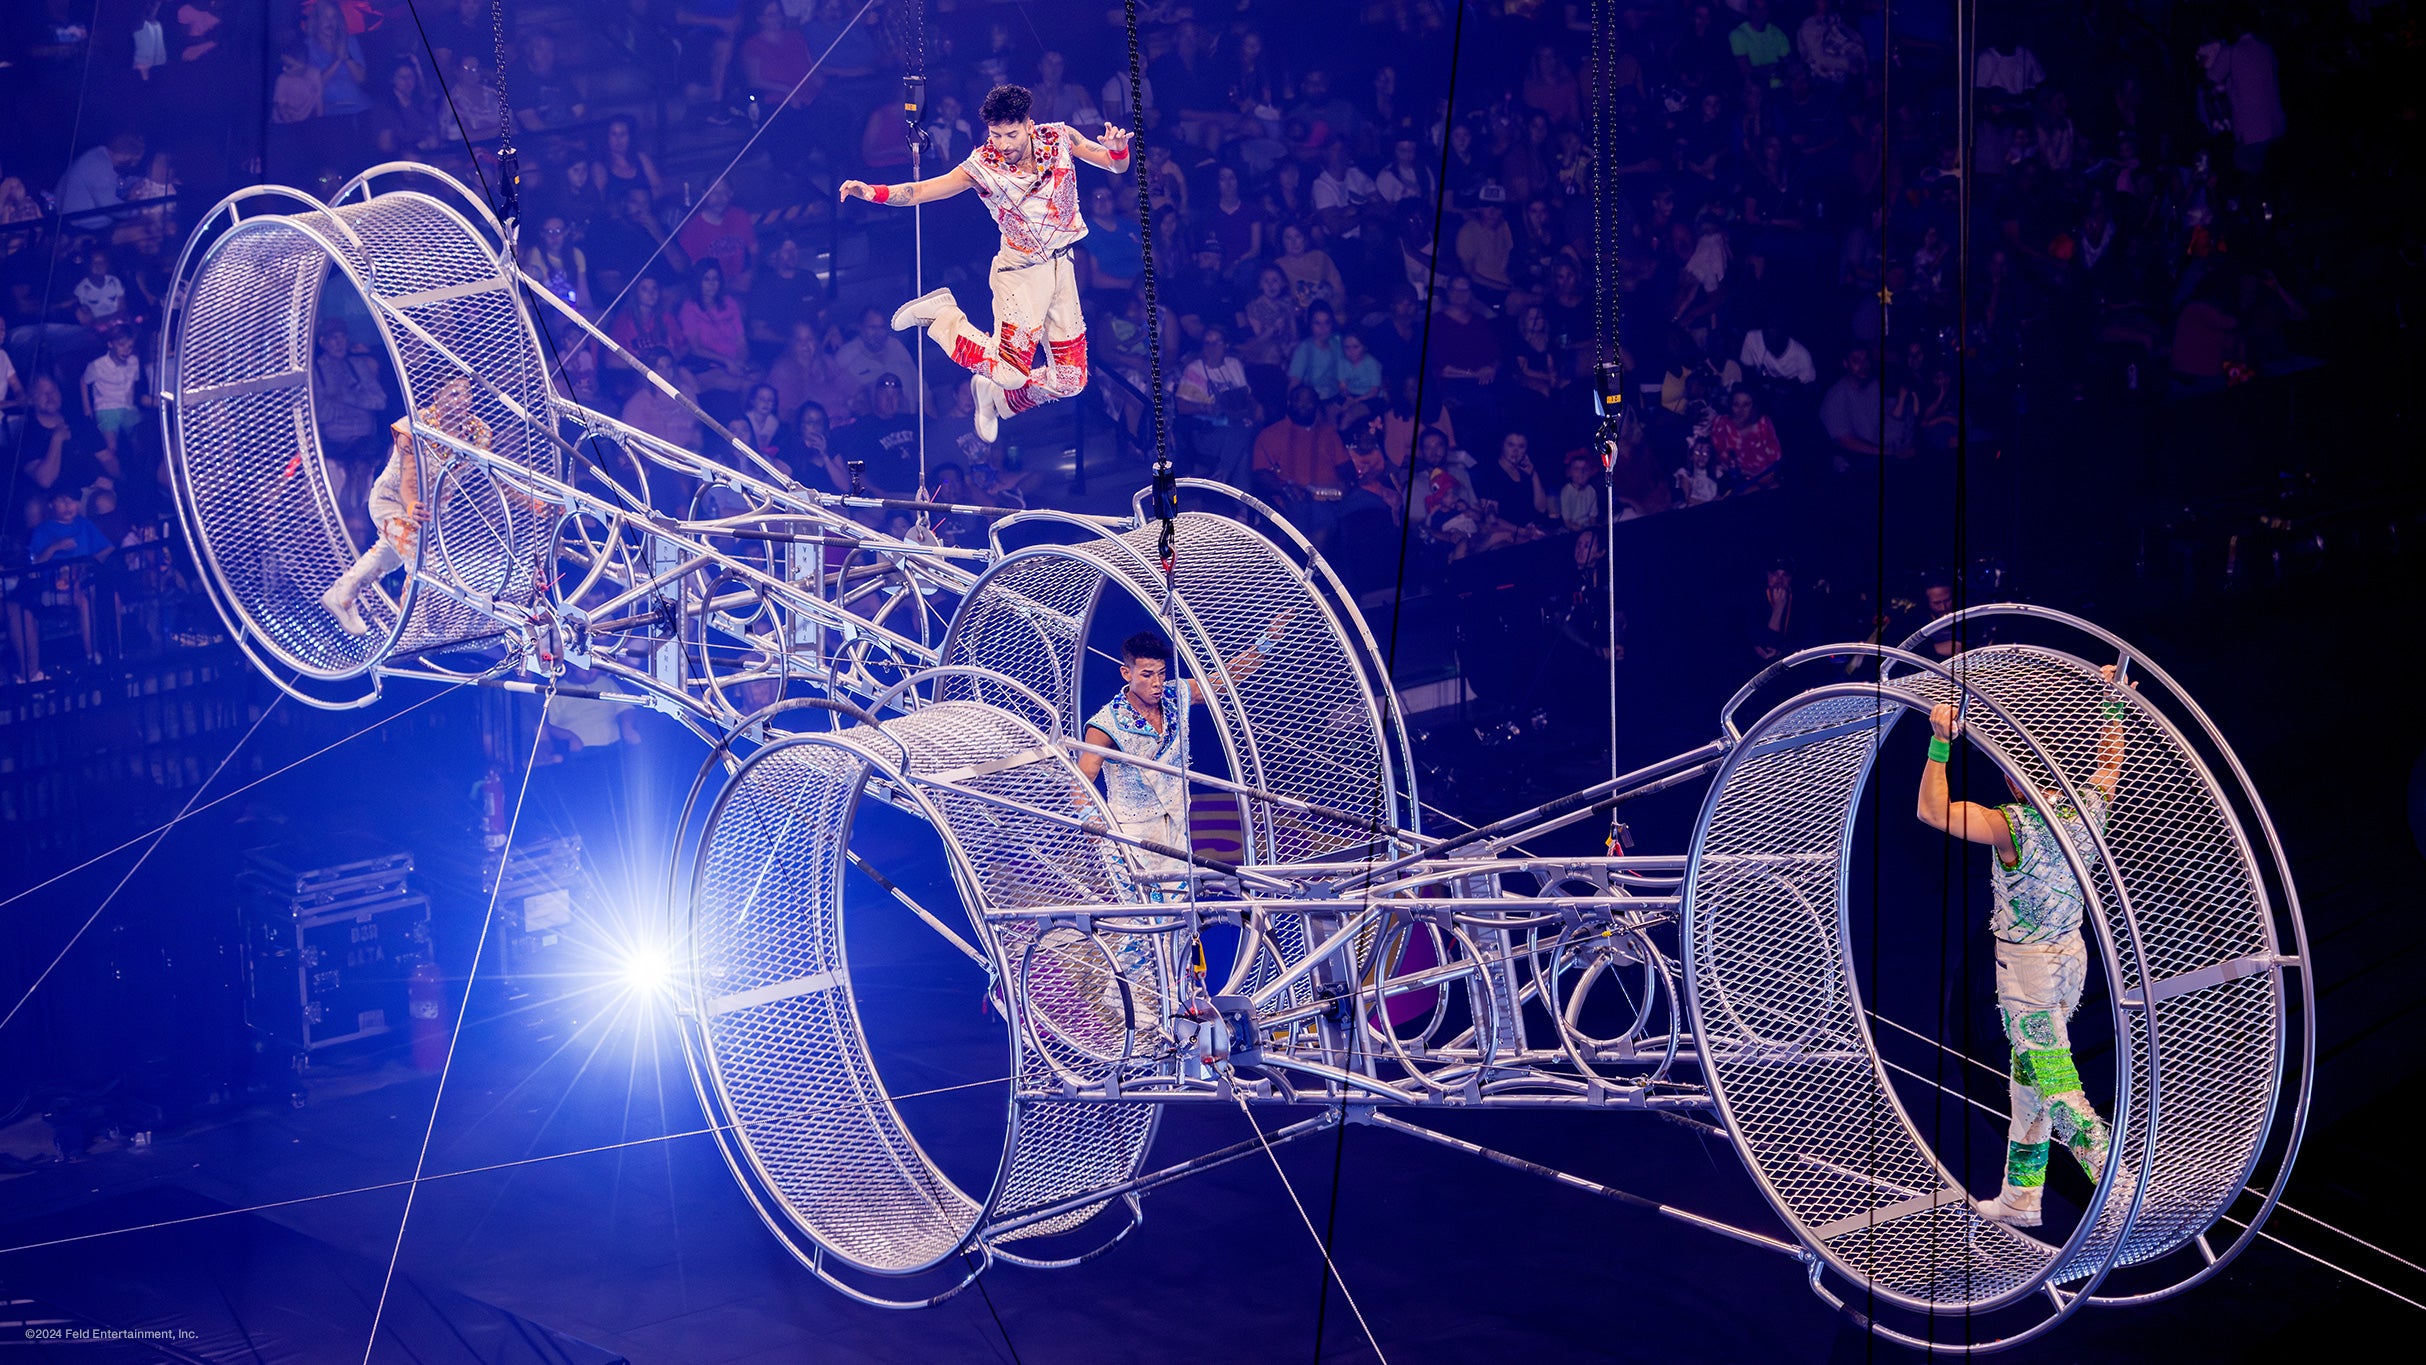 Ringling Bros. and Barnum & Bailey presents The Greatest Show On Earth presales in Phoenix